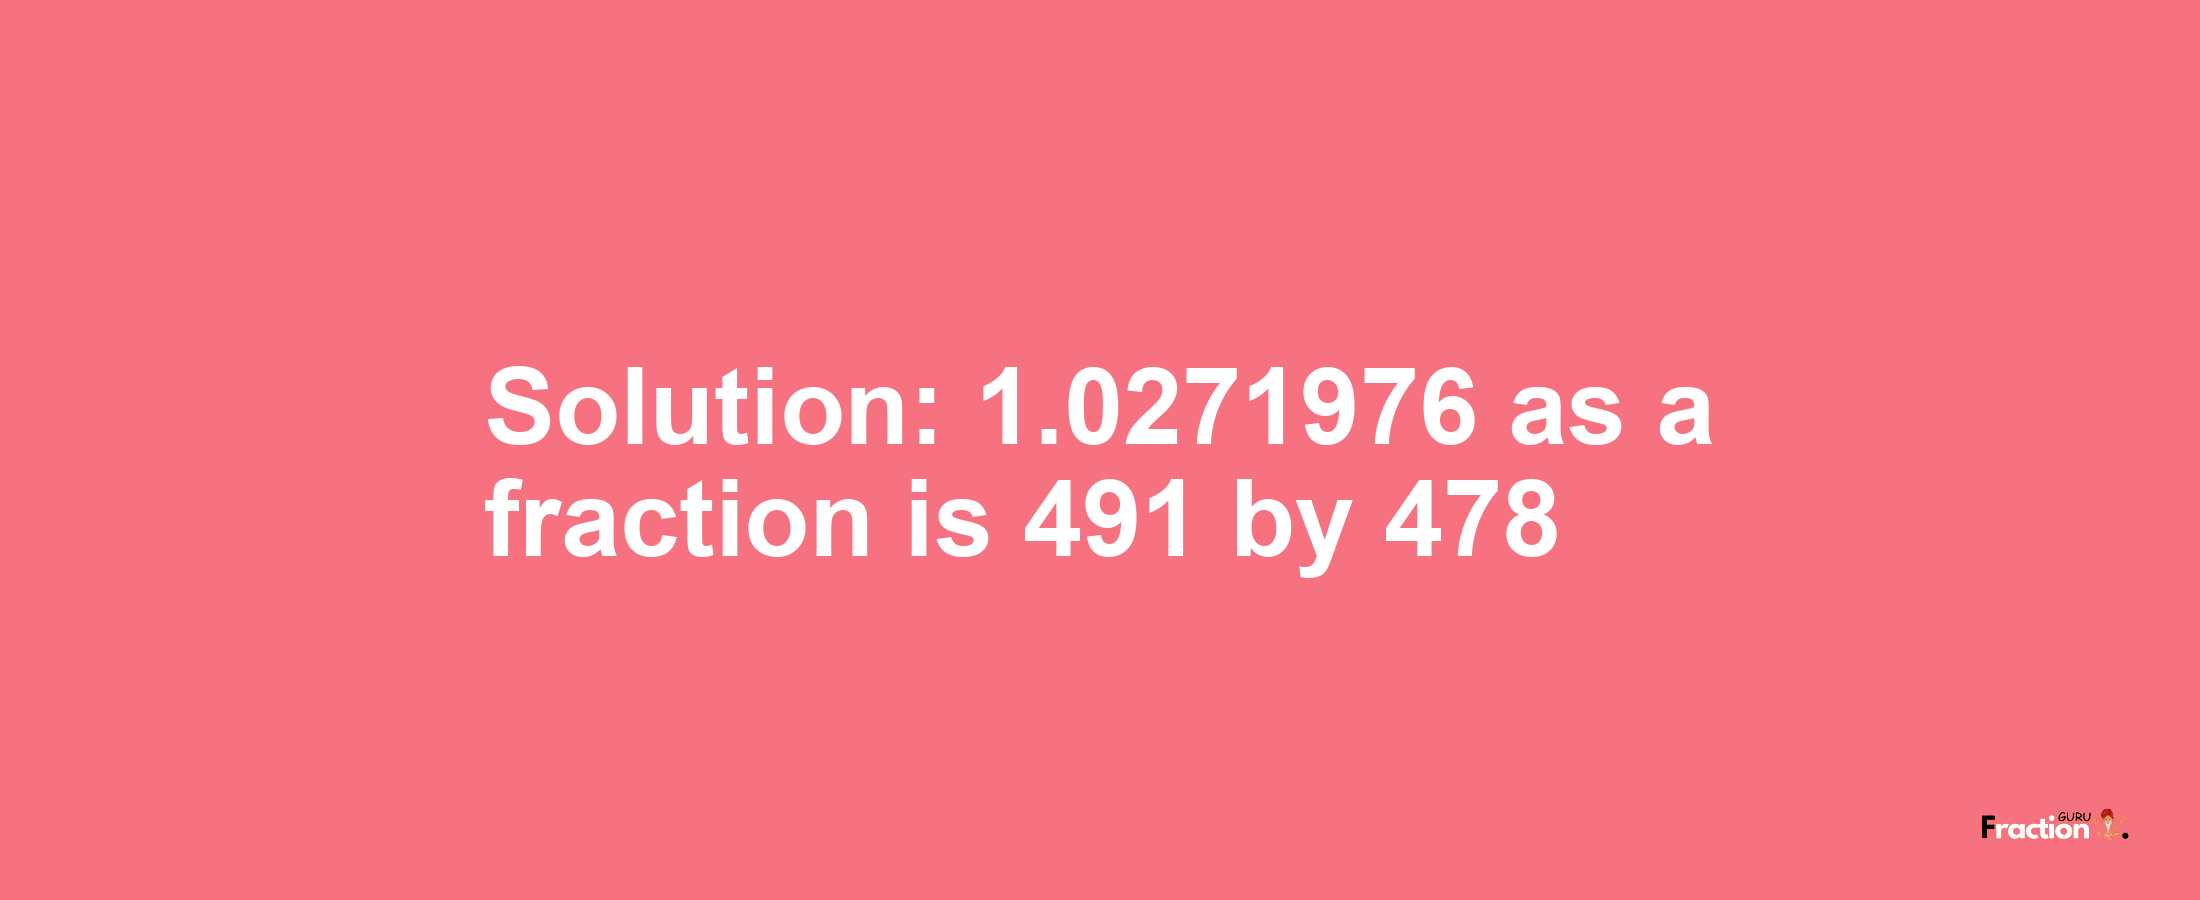 Solution:1.0271976 as a fraction is 491/478